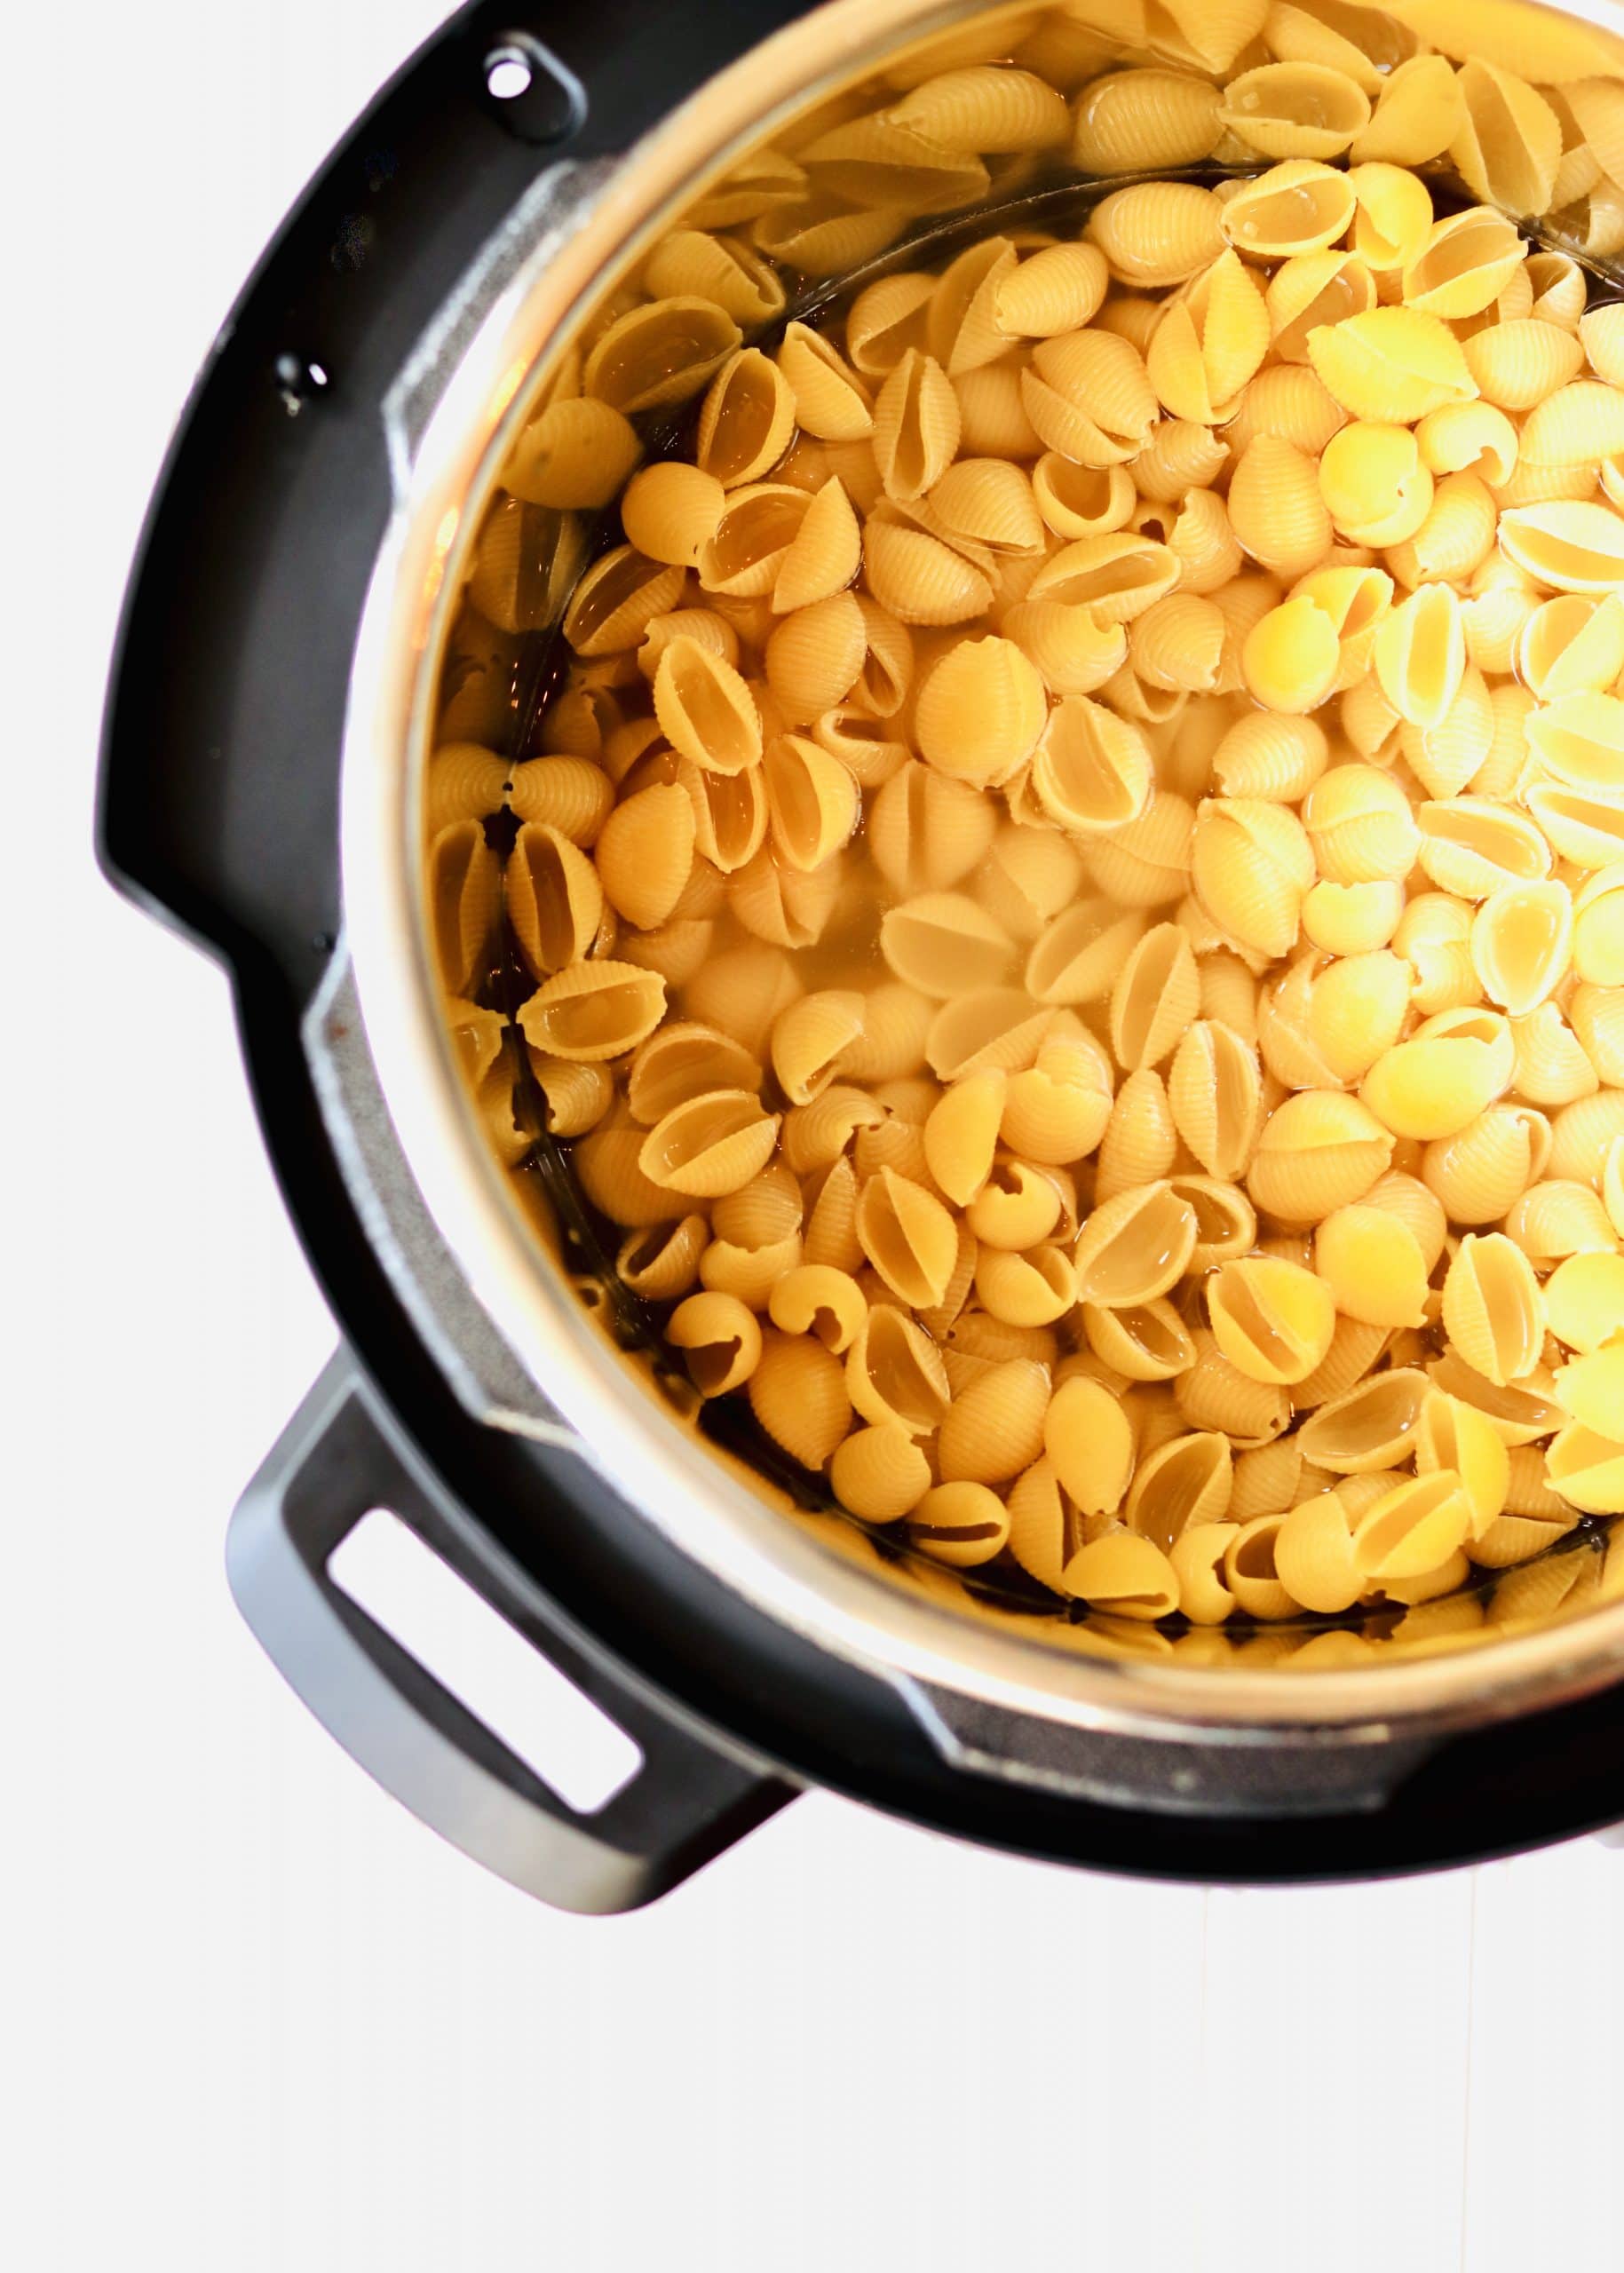 Elbow macaroni noodles in pressure cooker